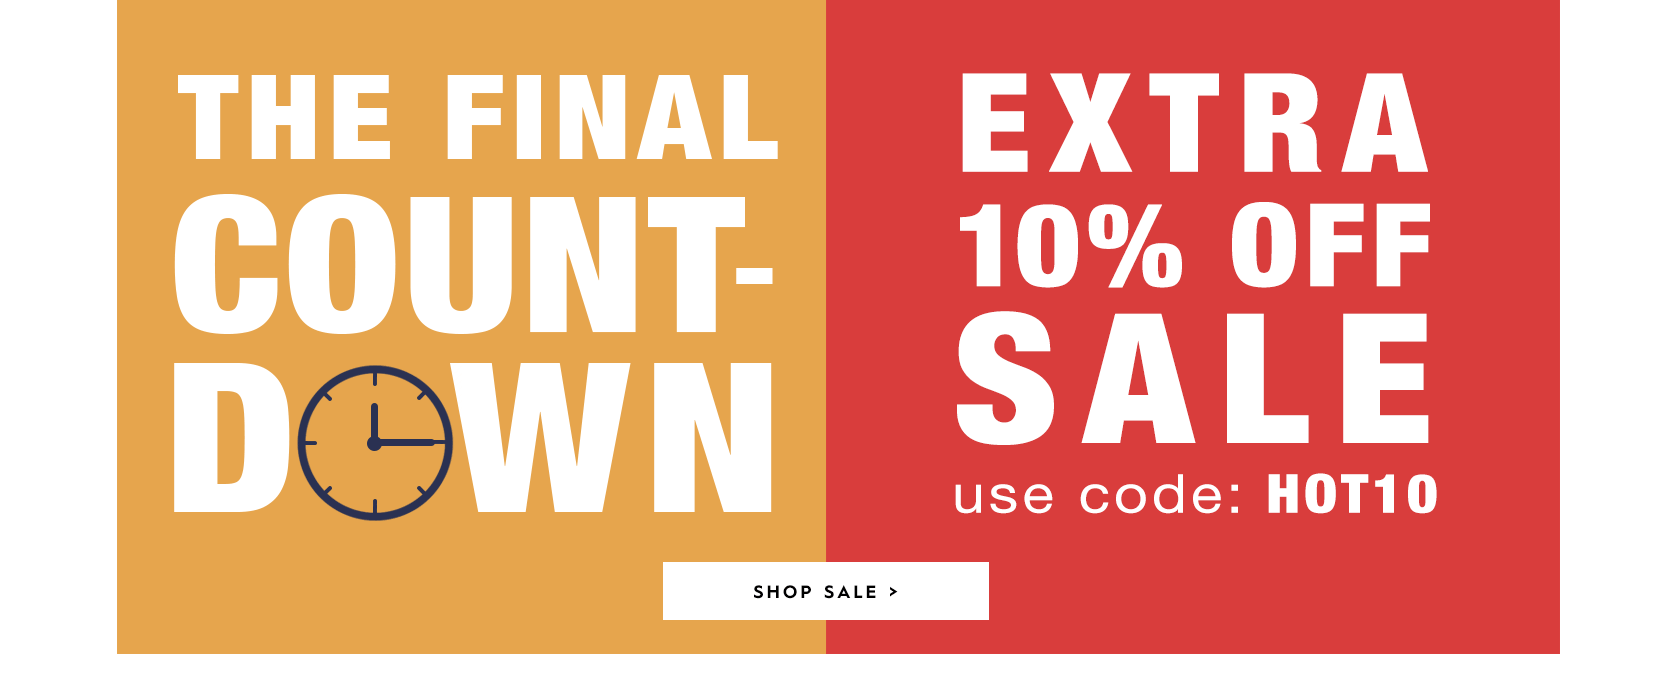 Woolovers: extra 10% off women's and men's knitwear sale